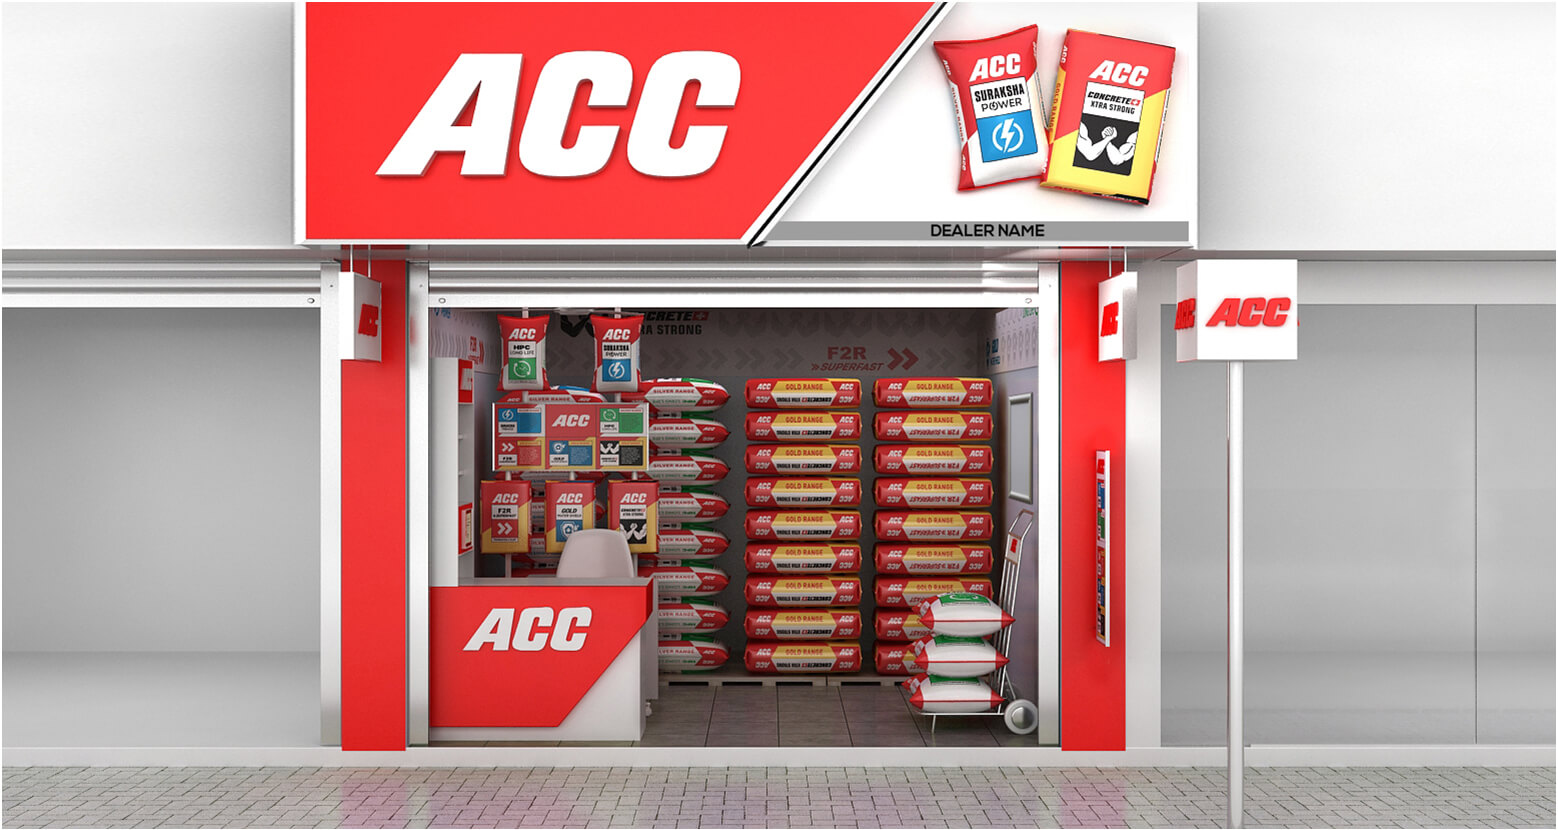 ACC Cement Case Study (Packaging) DY Works | Packaging Case Strudy